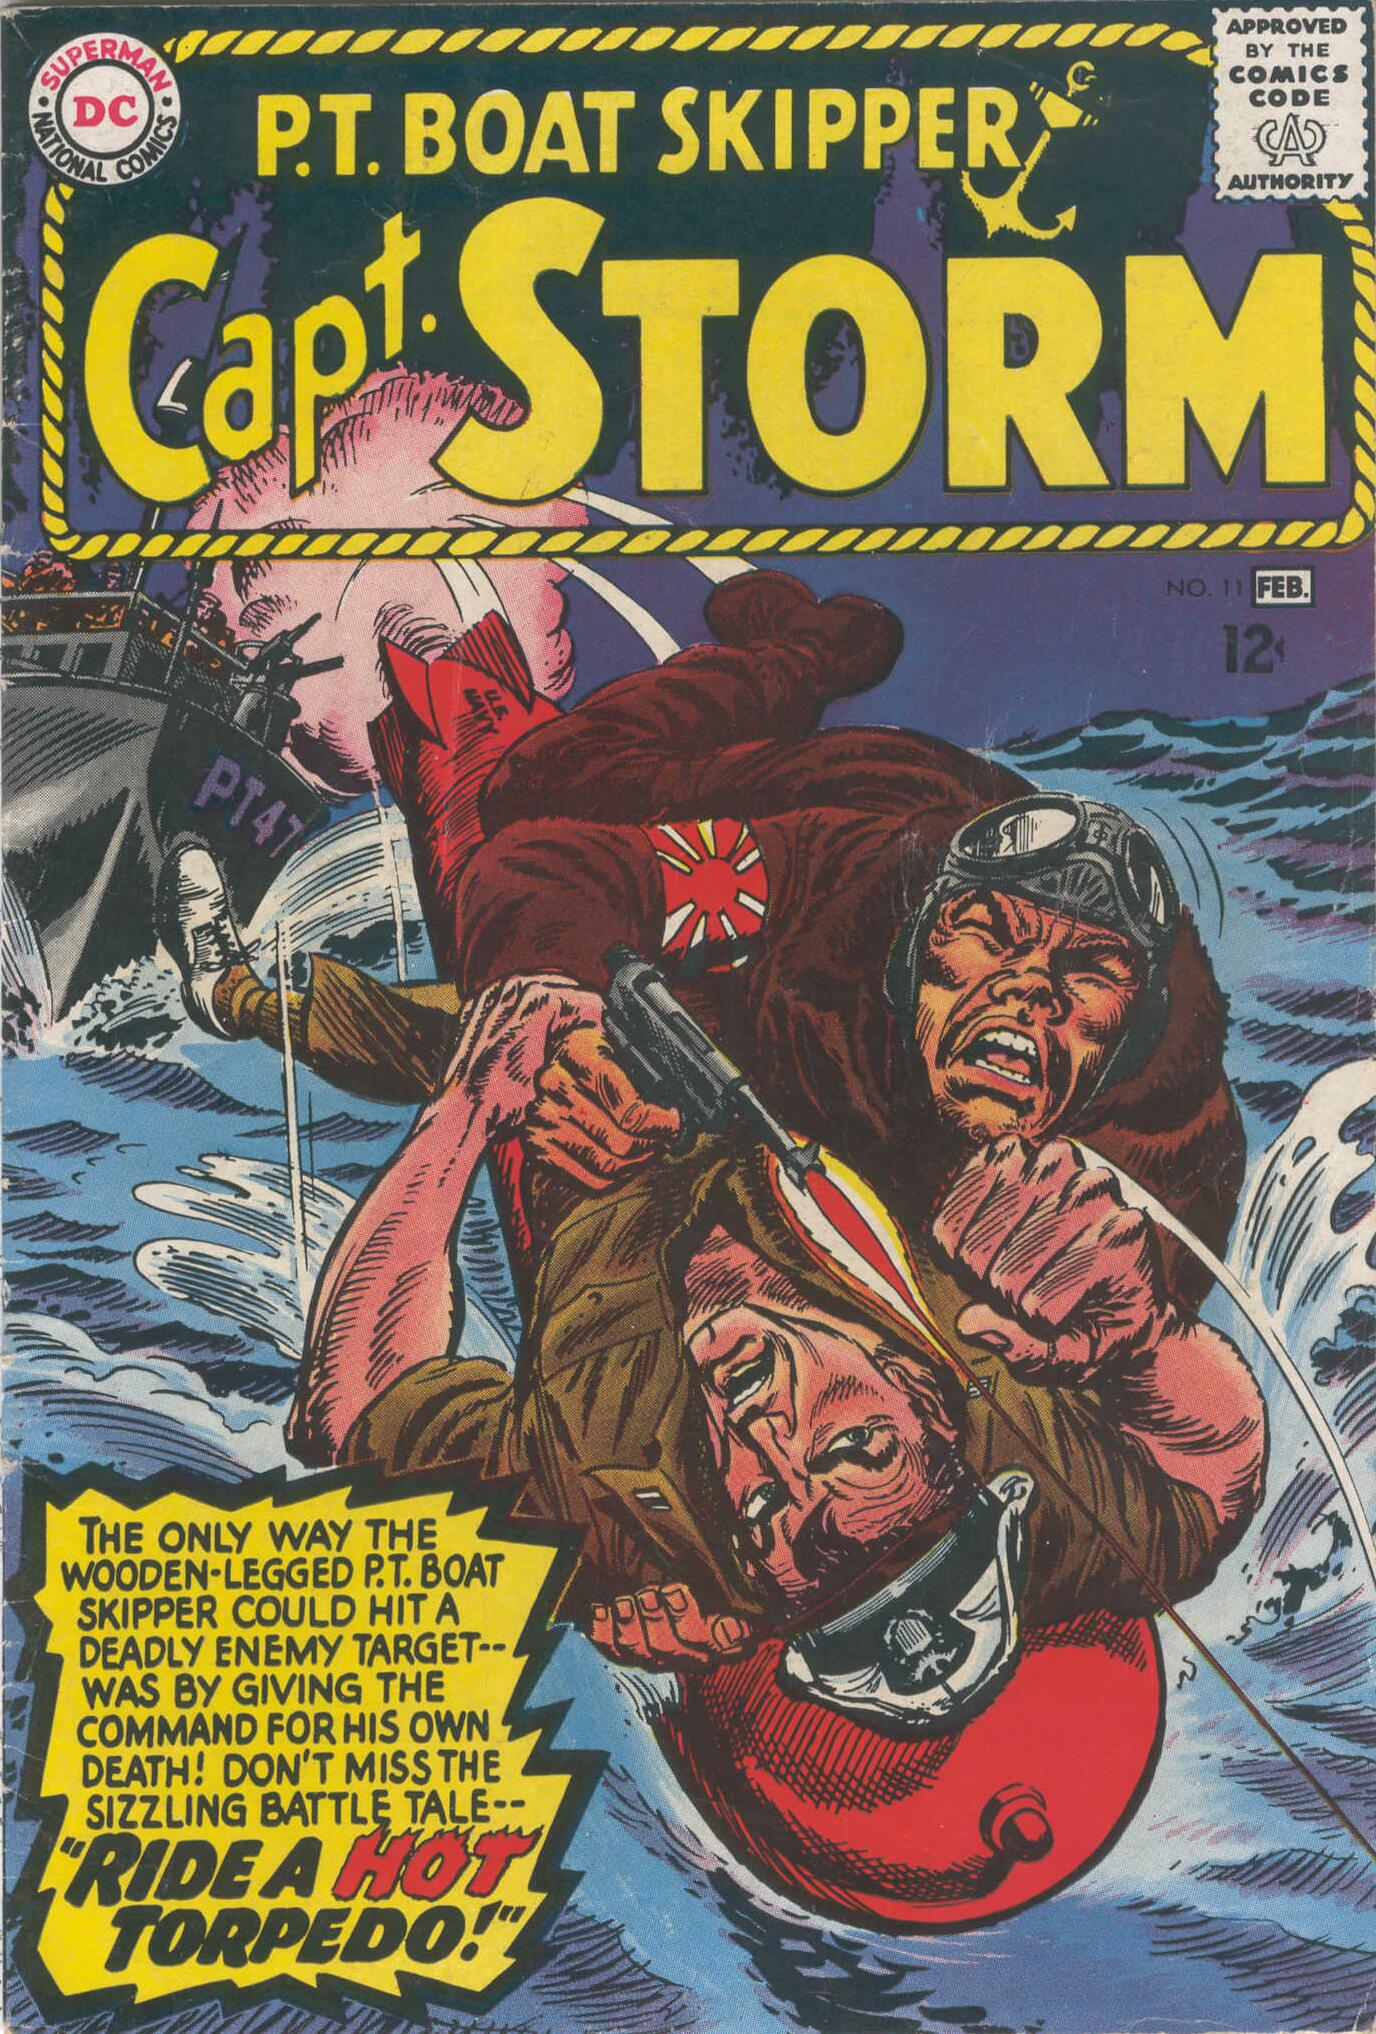 Read online Capt. Storm comic -  Issue #11 - 1